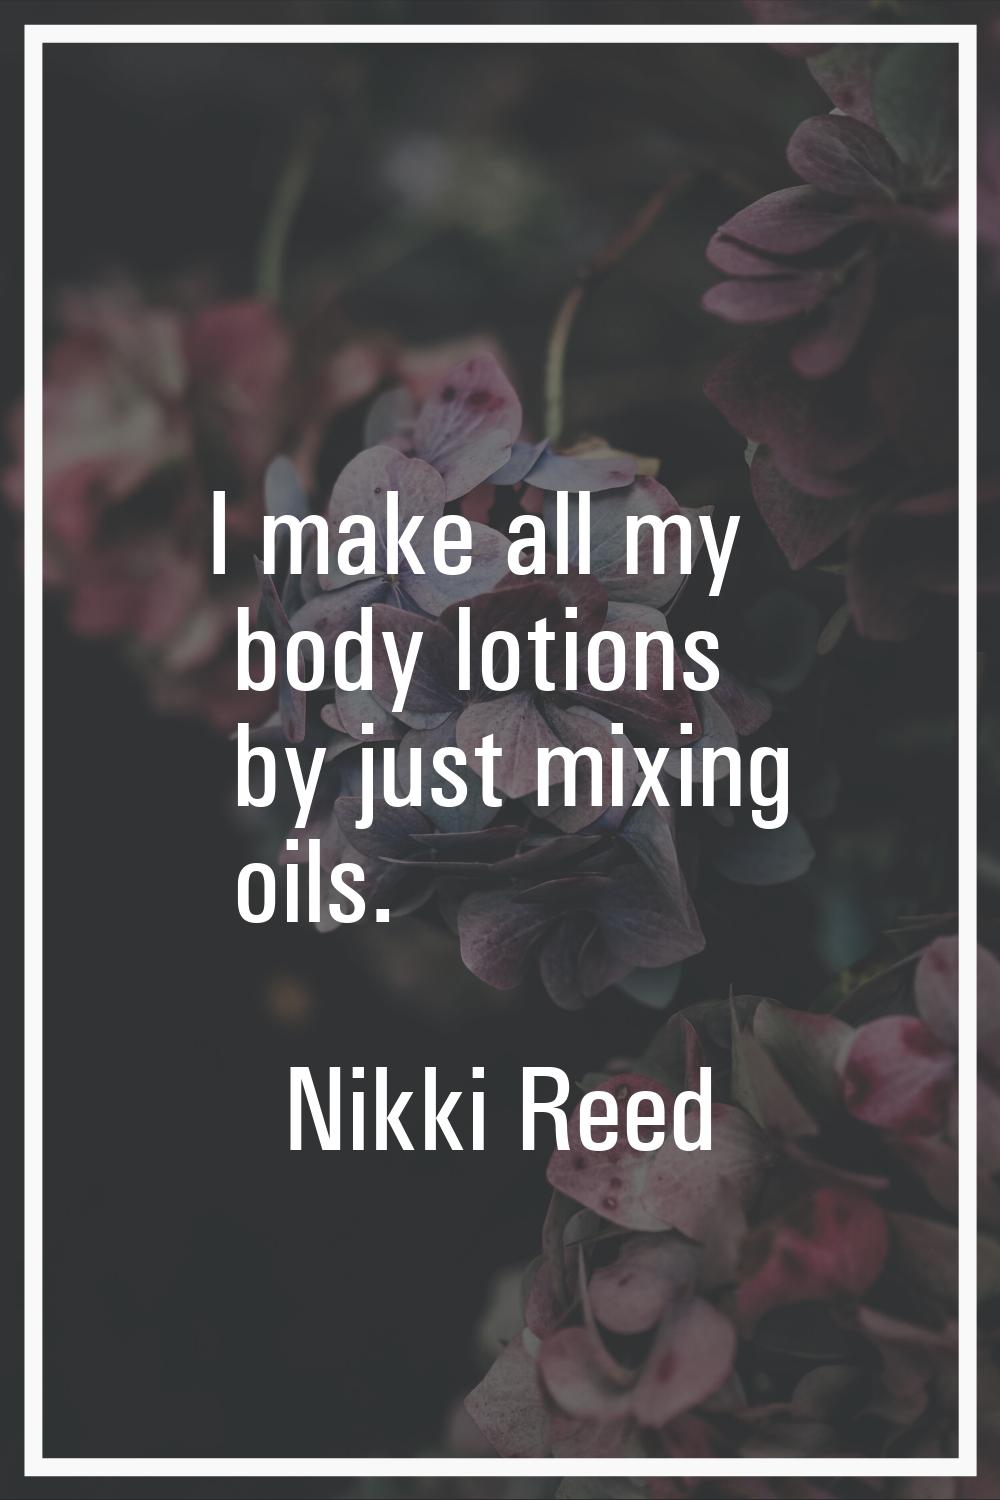 I make all my body lotions by just mixing oils.